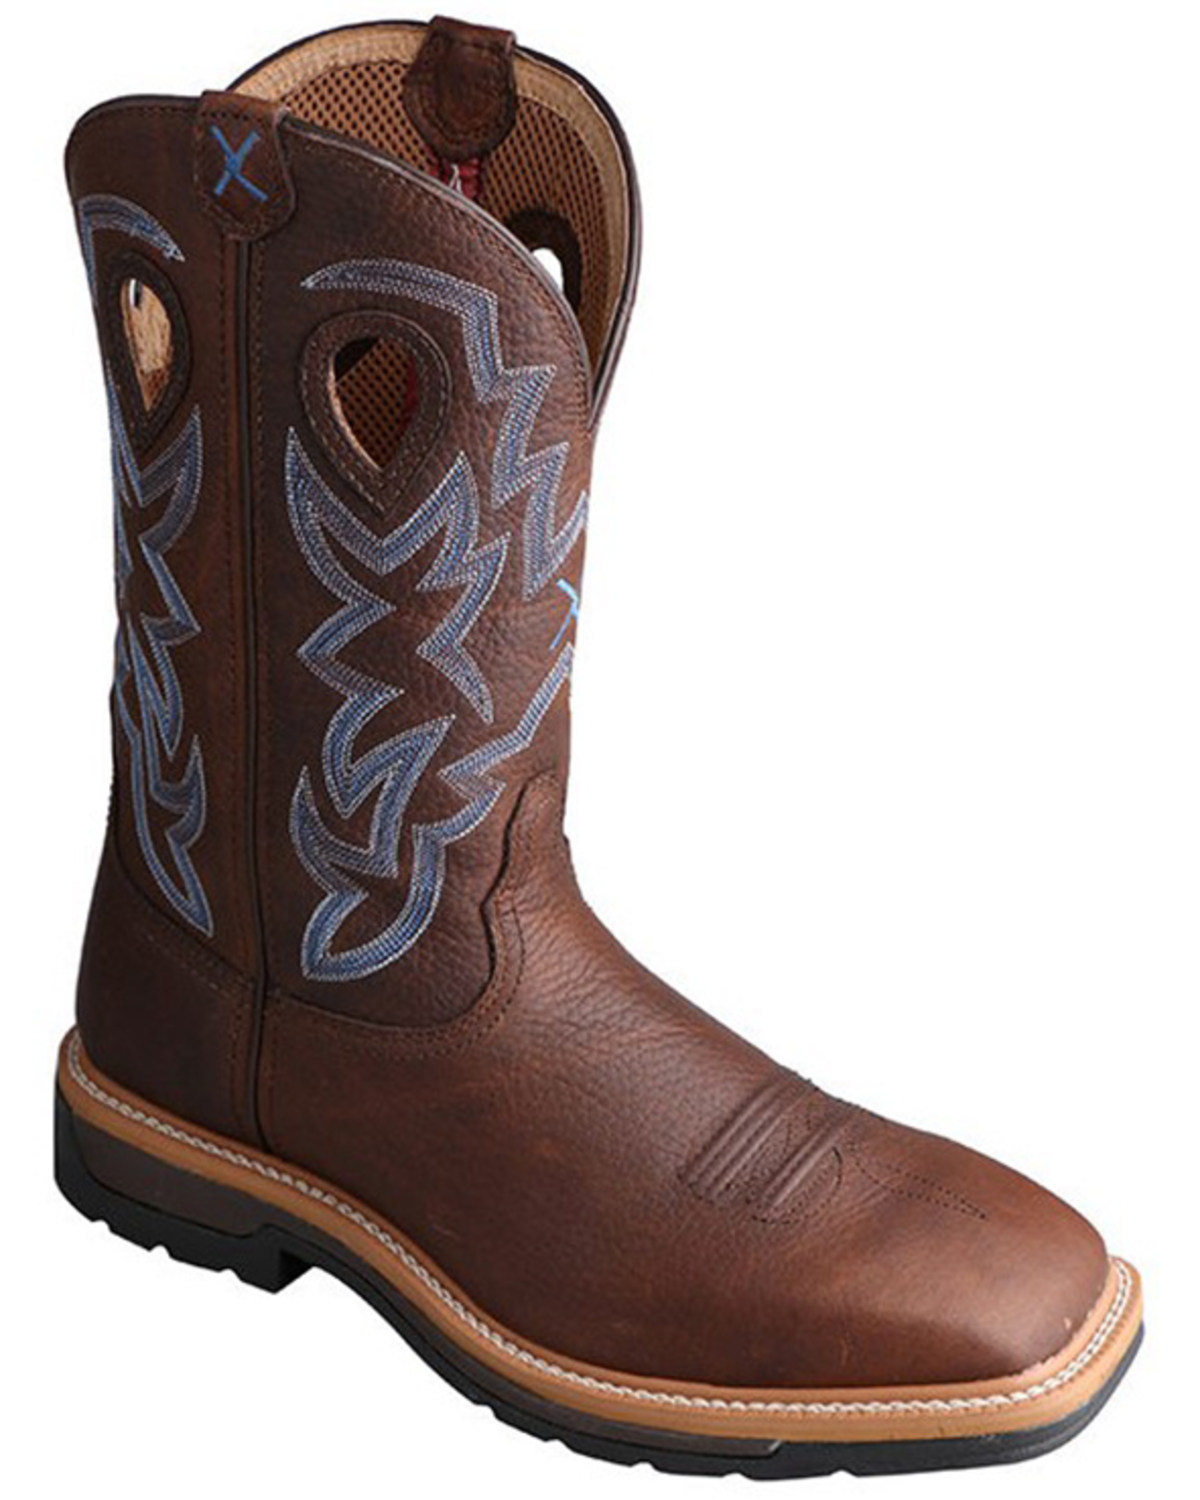 Twisted X Boots Men's Western Work - Steel Toe Extended Sizes